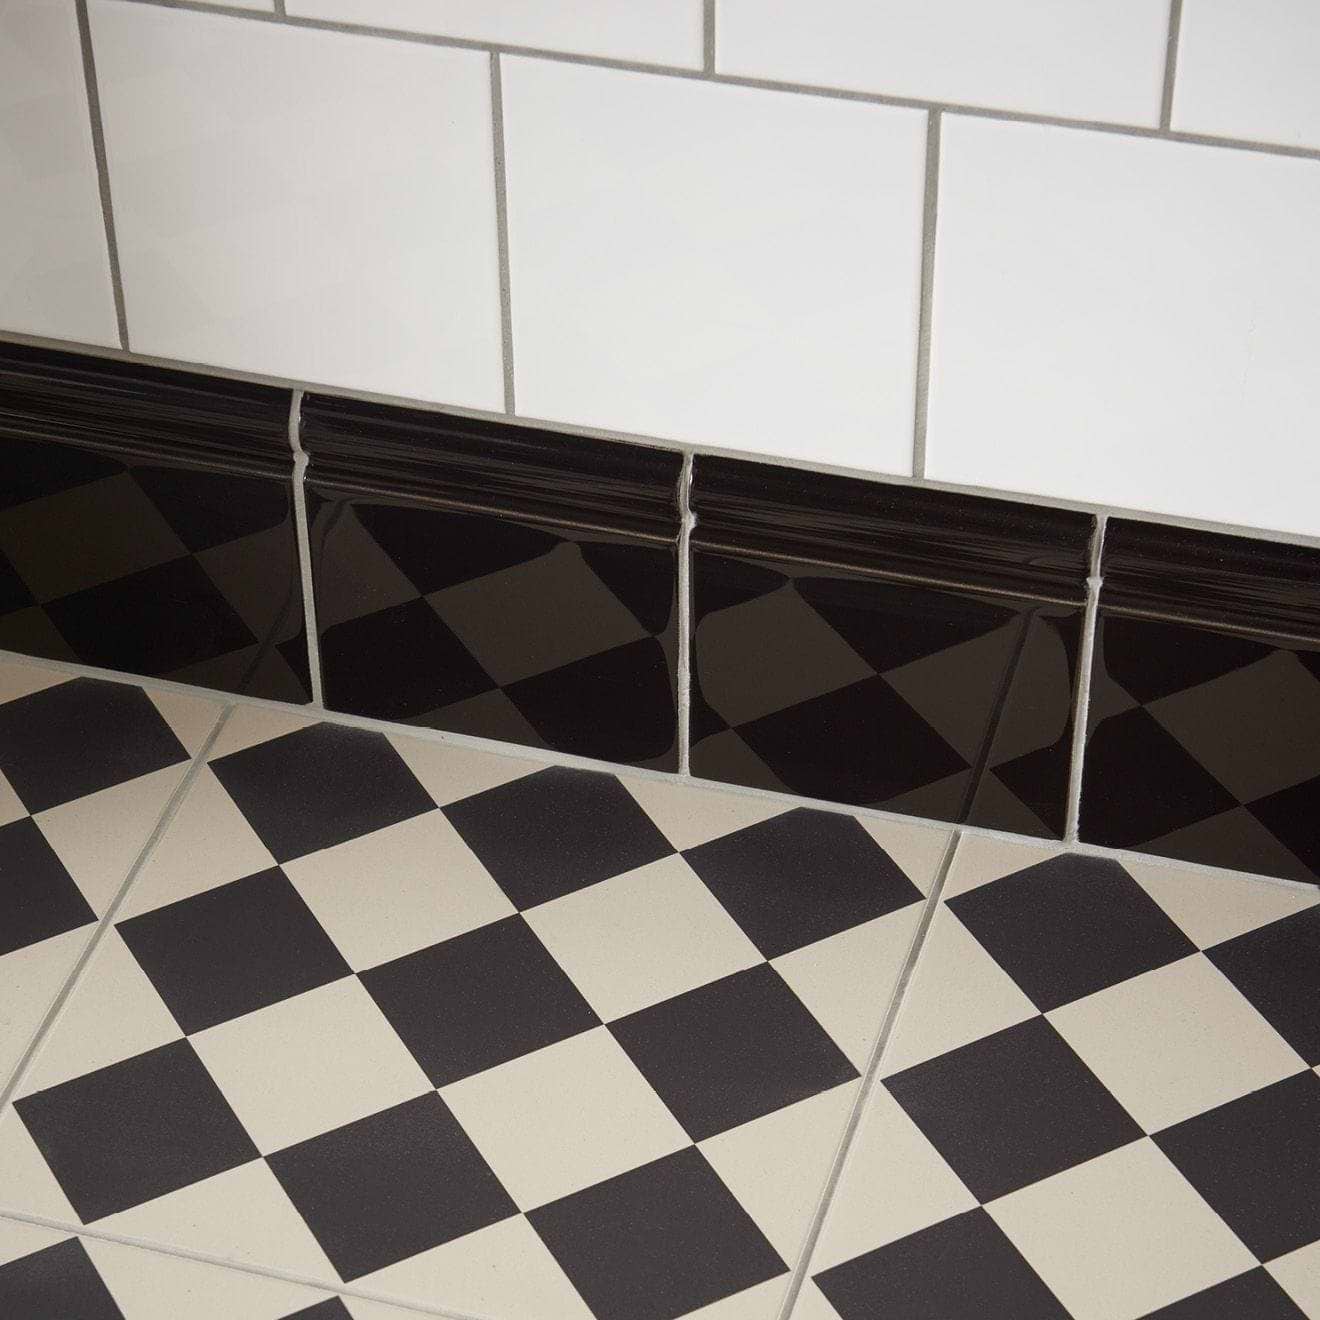 Skirting tiles, good looks and practicality for flooring | Porcelanos